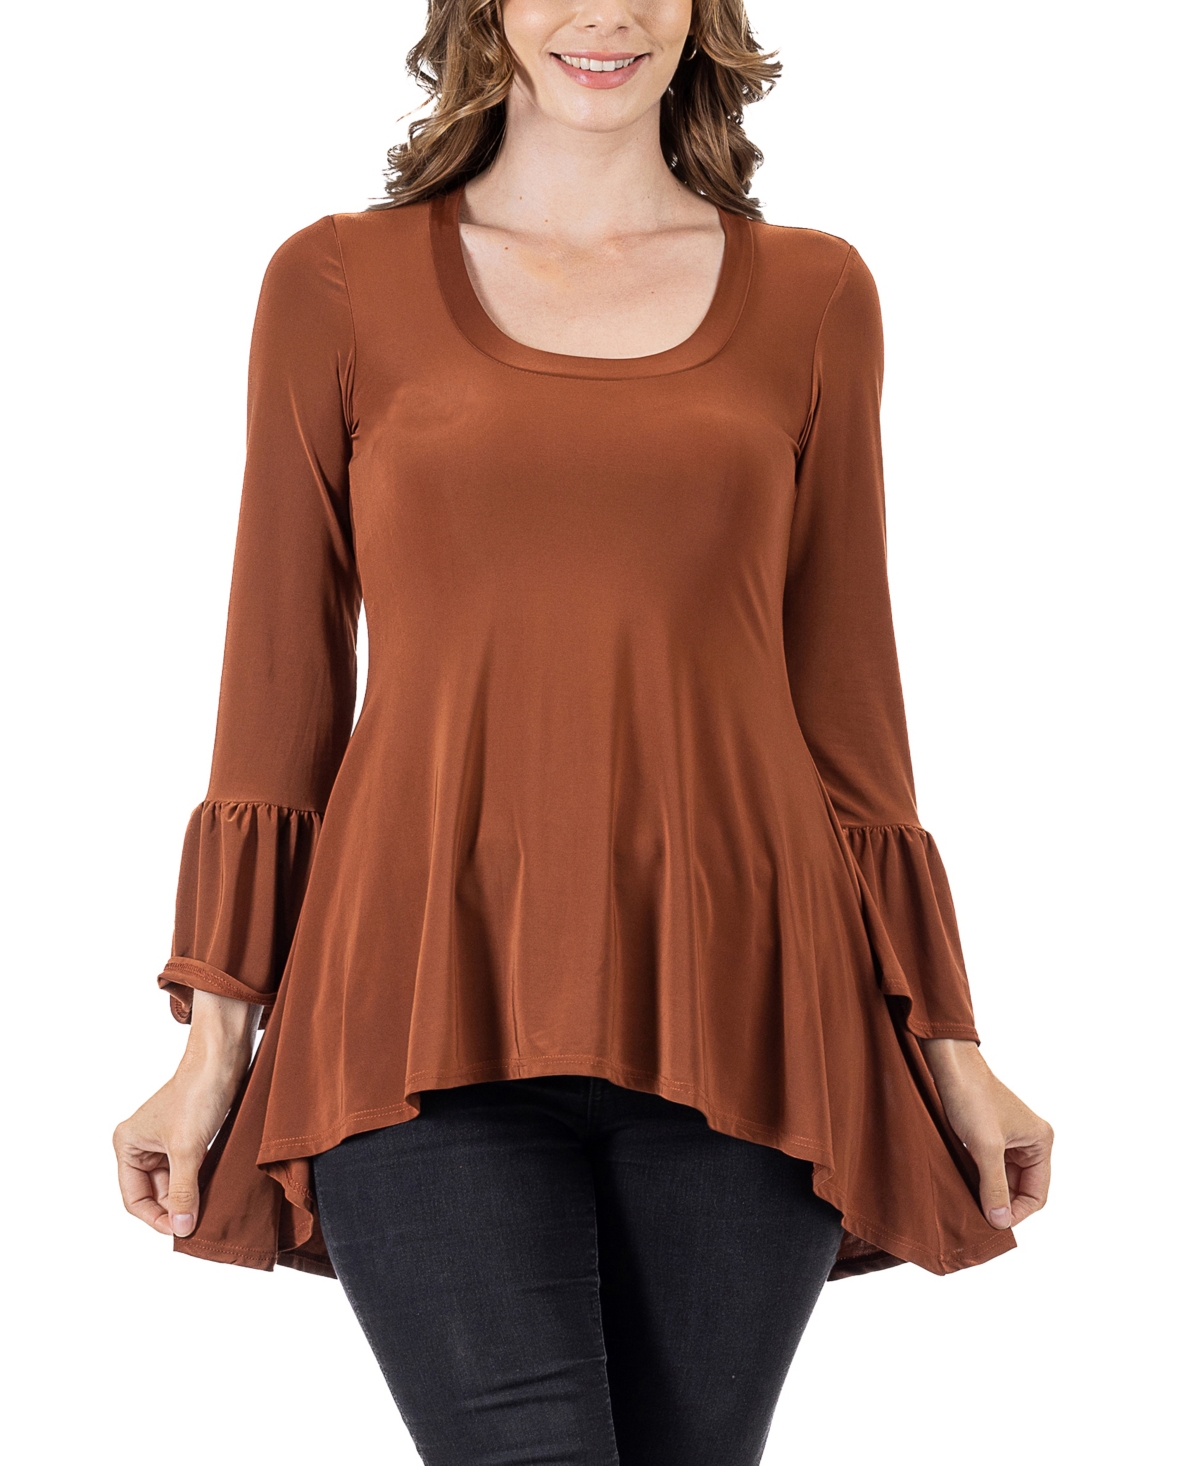 24seven Comfort Apparel Women's Long Bell Sleeve High Low Tunic Top In Tobacco